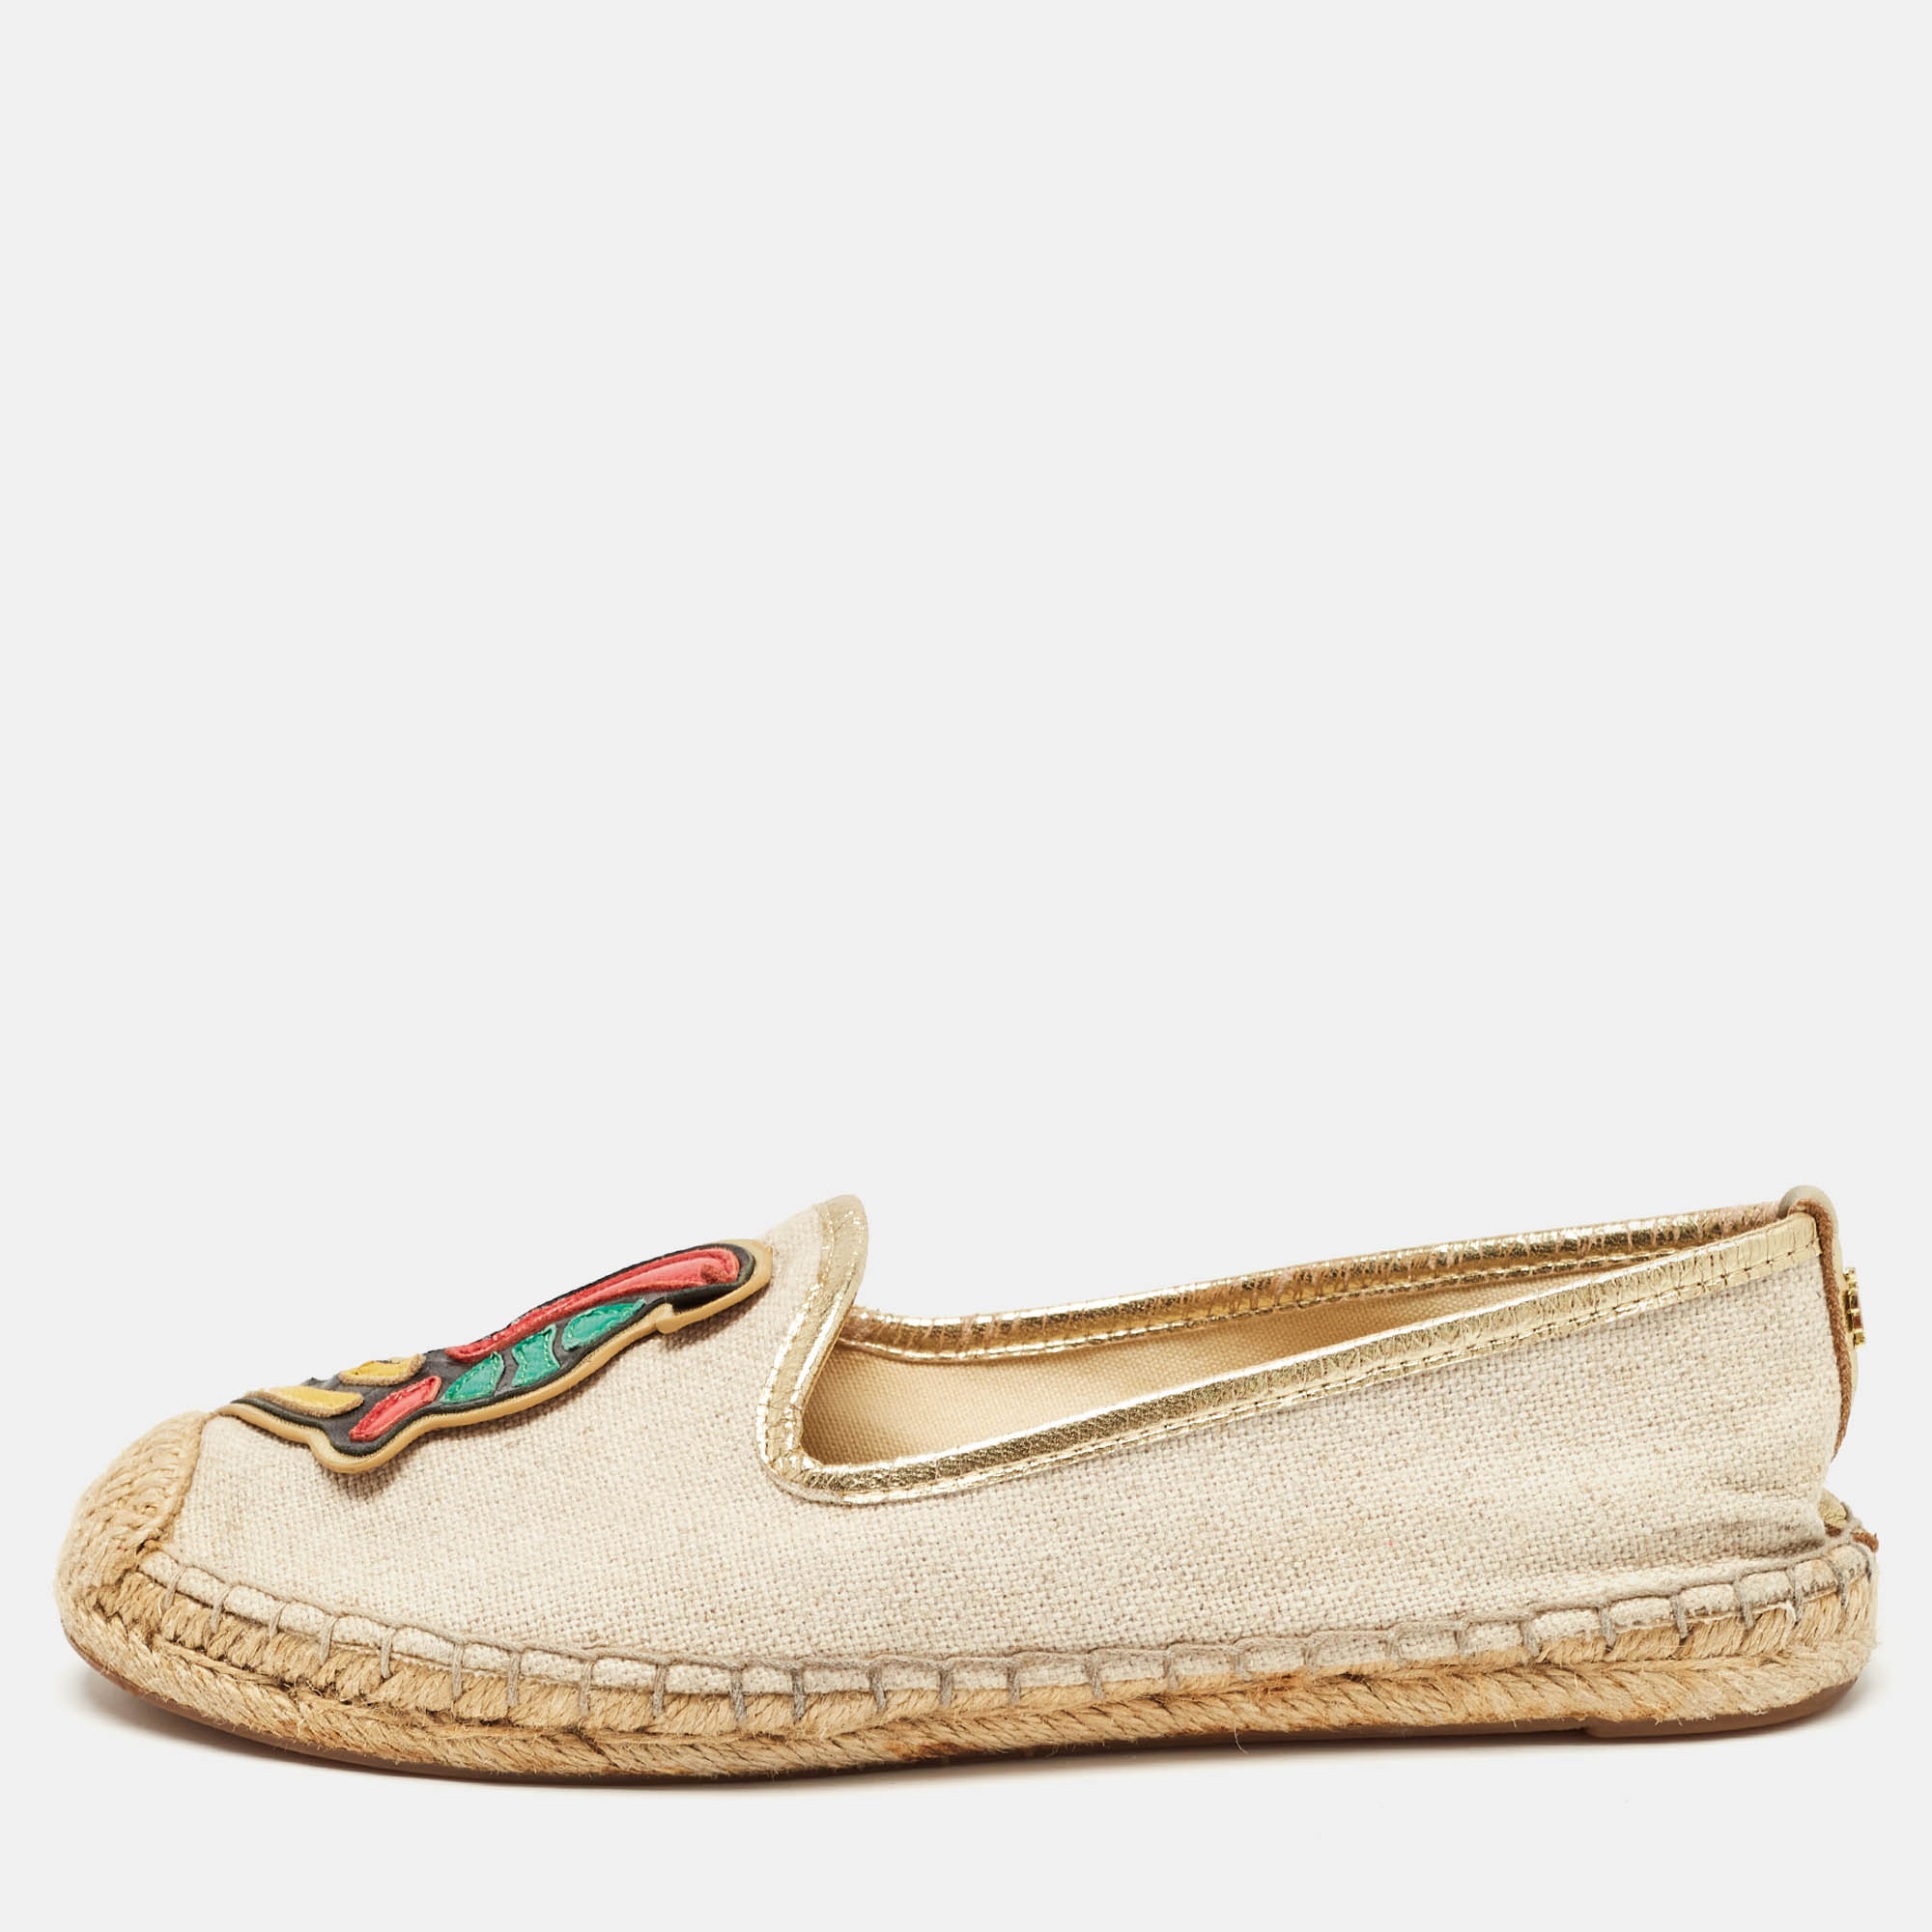 

Tory Burch Beige/Gold Canvas and Leather Trim Slip On Espadrille Flats Size 36